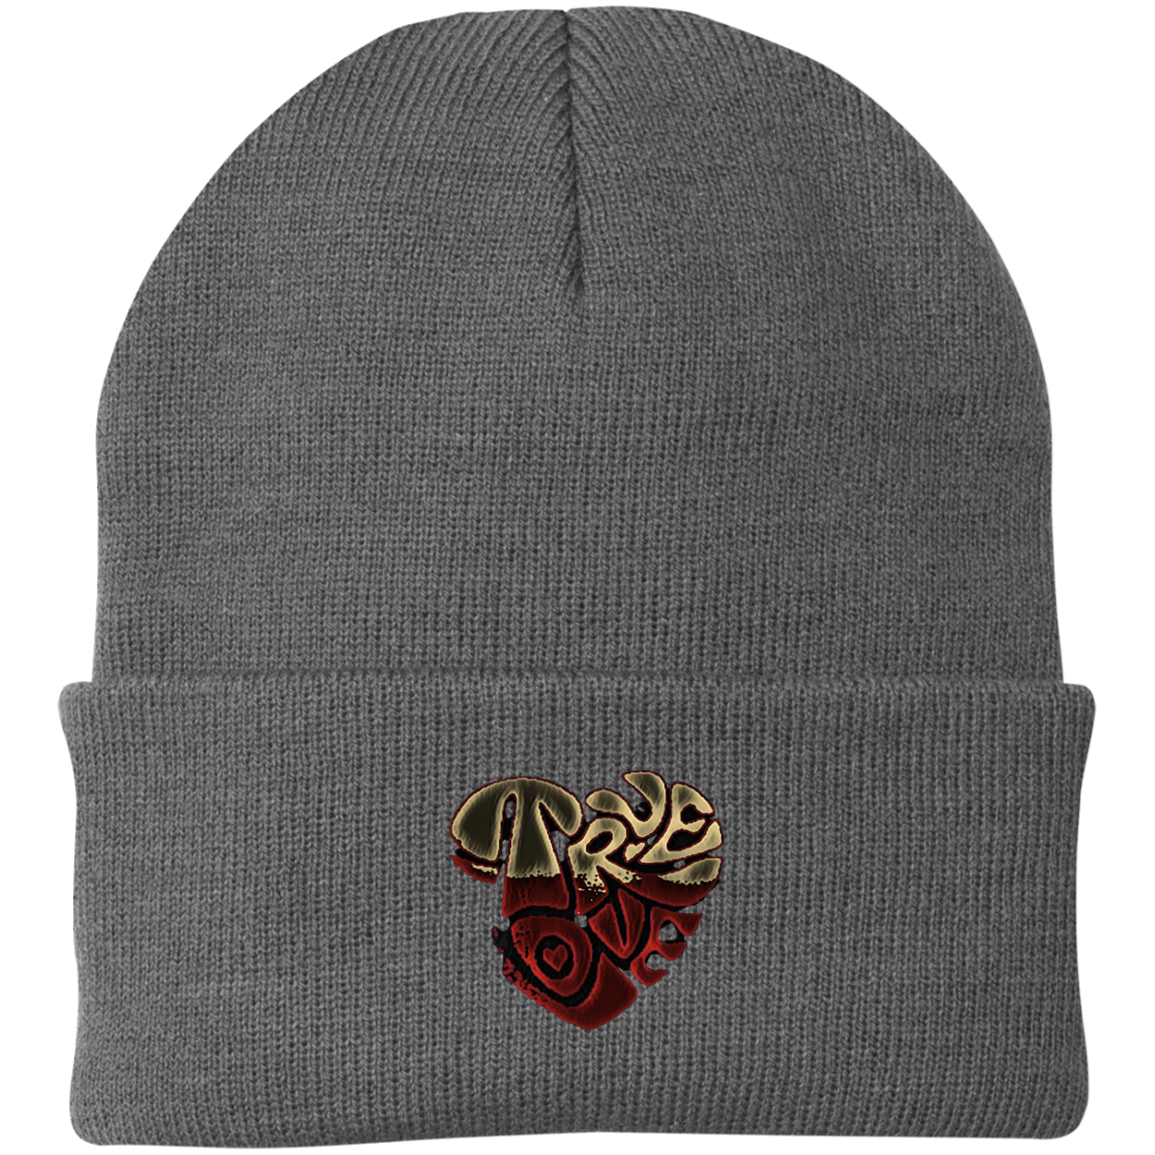 True Love dirty logo by Wisam Embroidered Knit Cap